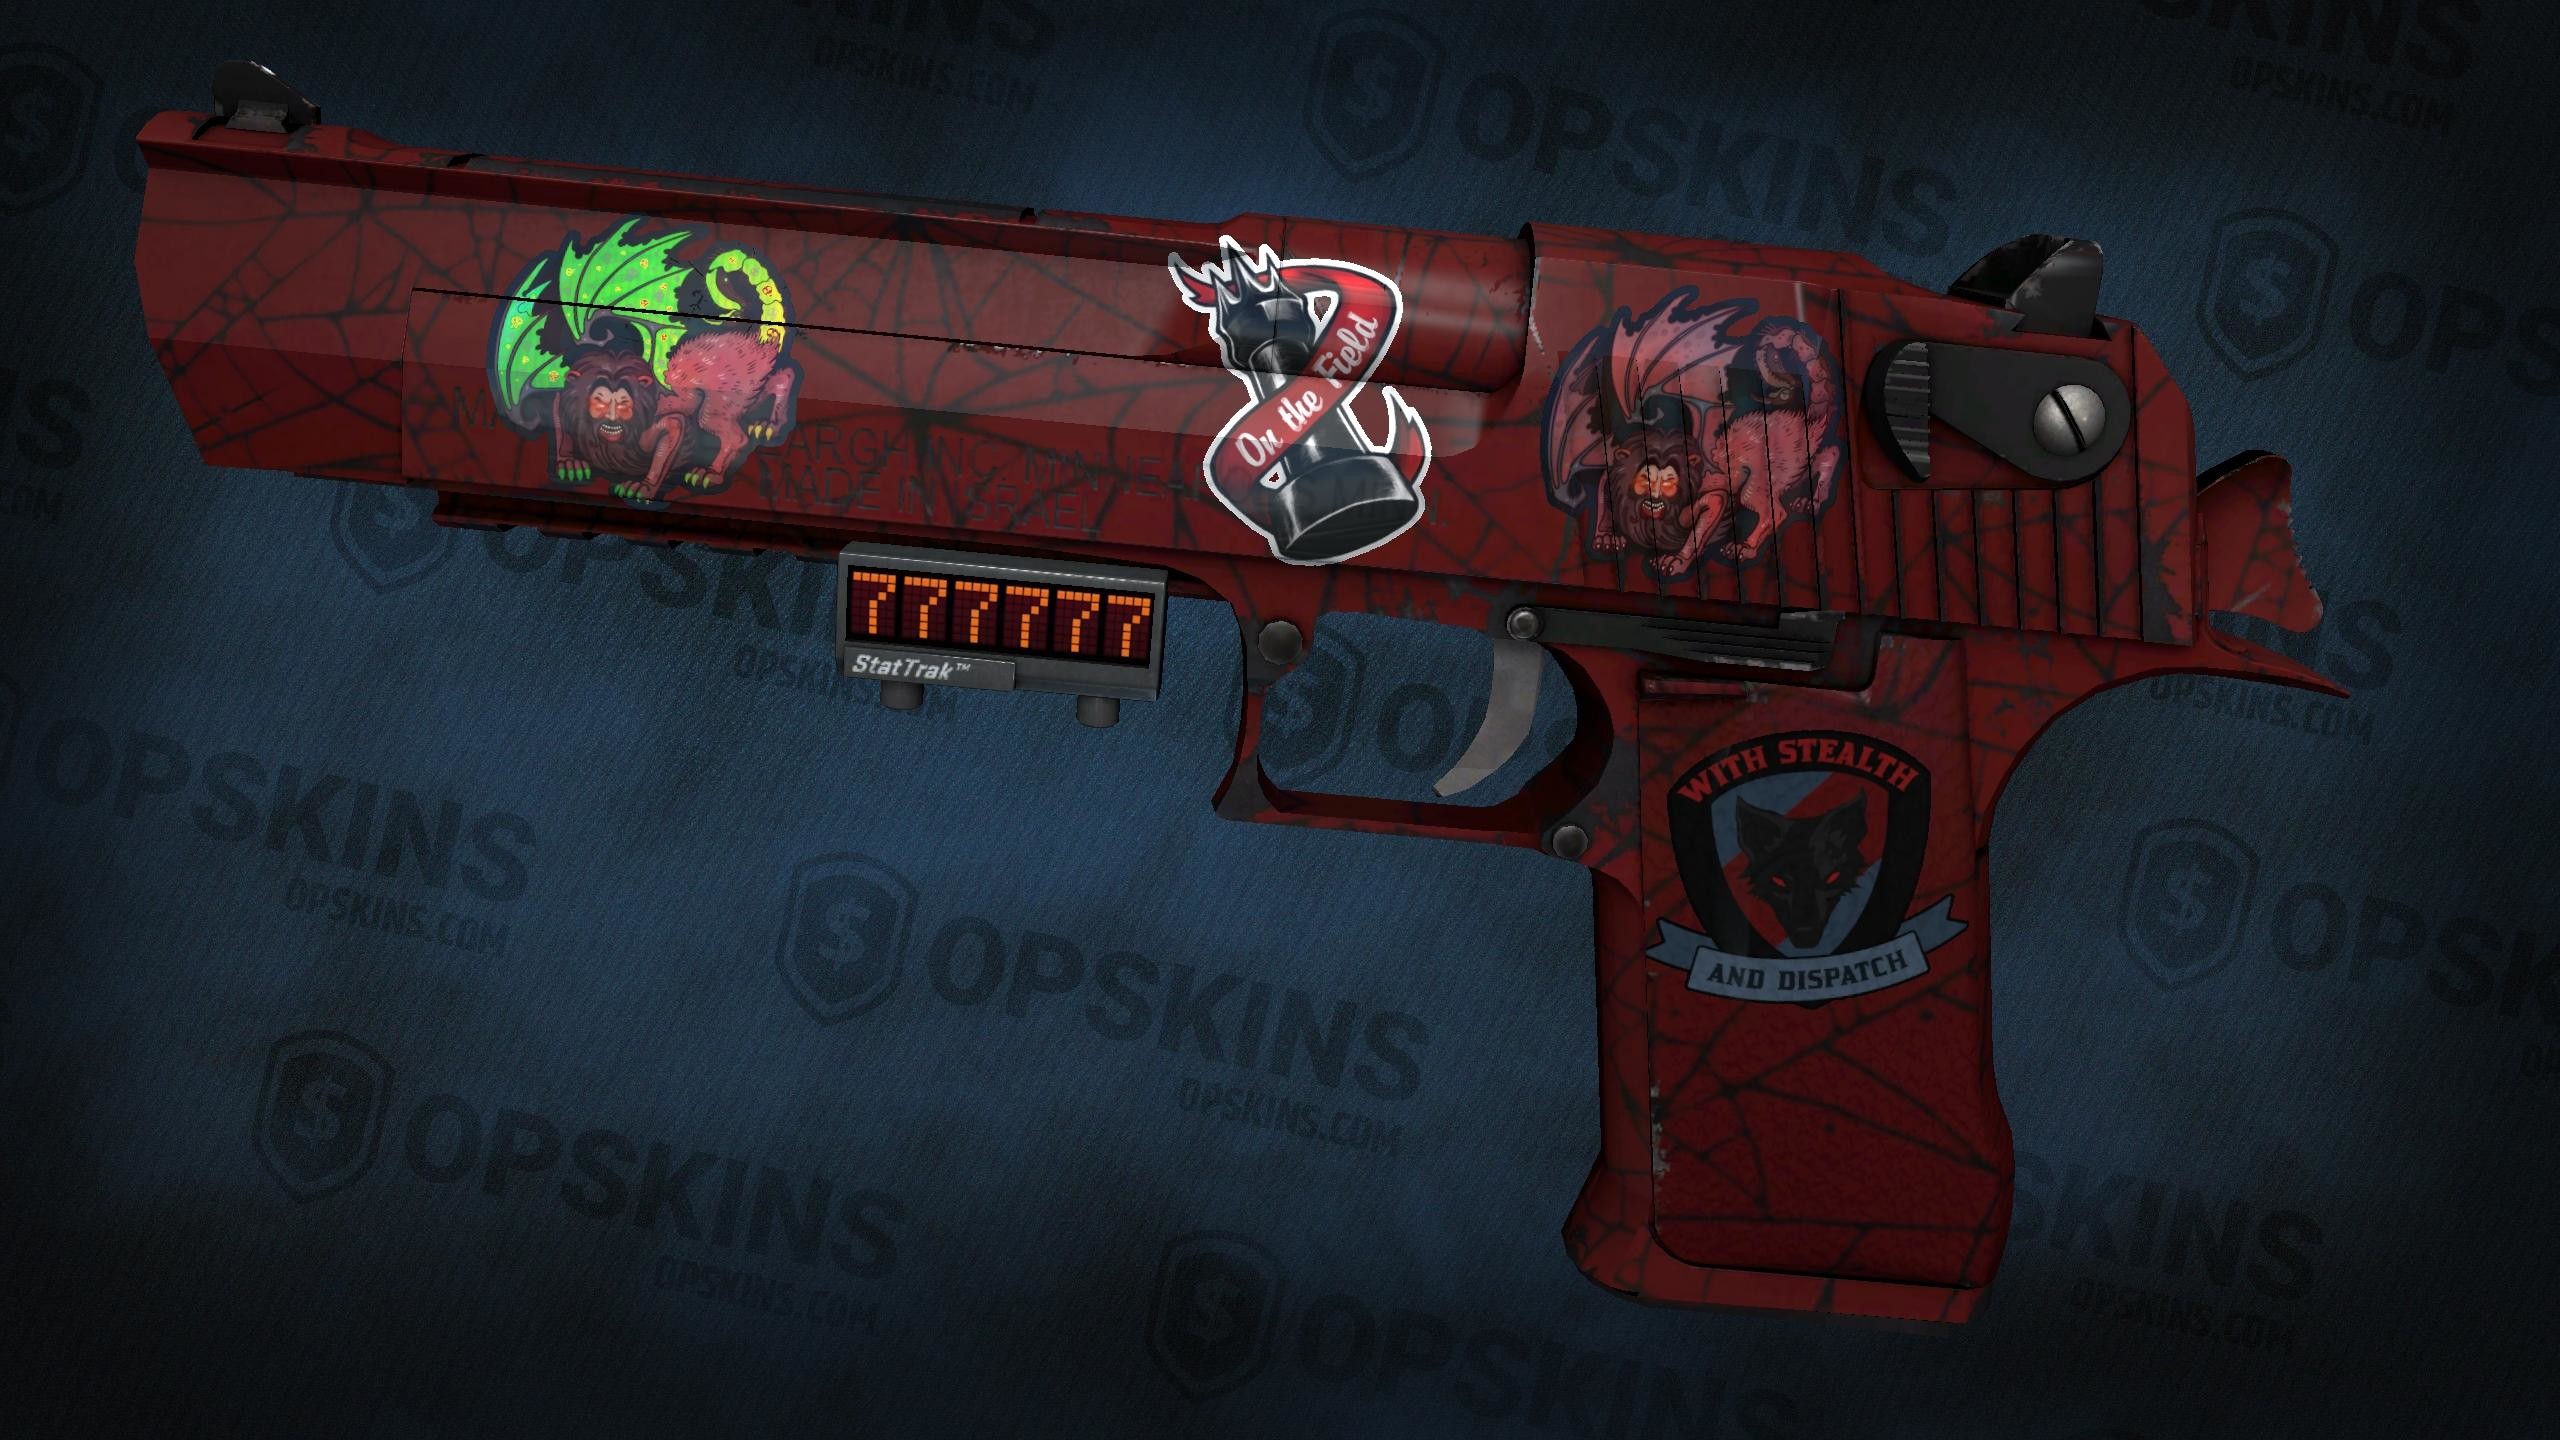 2560x1440 This amazing desert eagle skin is only 25 $! Market price is 20$ and this  stickers worth 60$. I dont use paypal, bitcoin or ops. only. Pm me